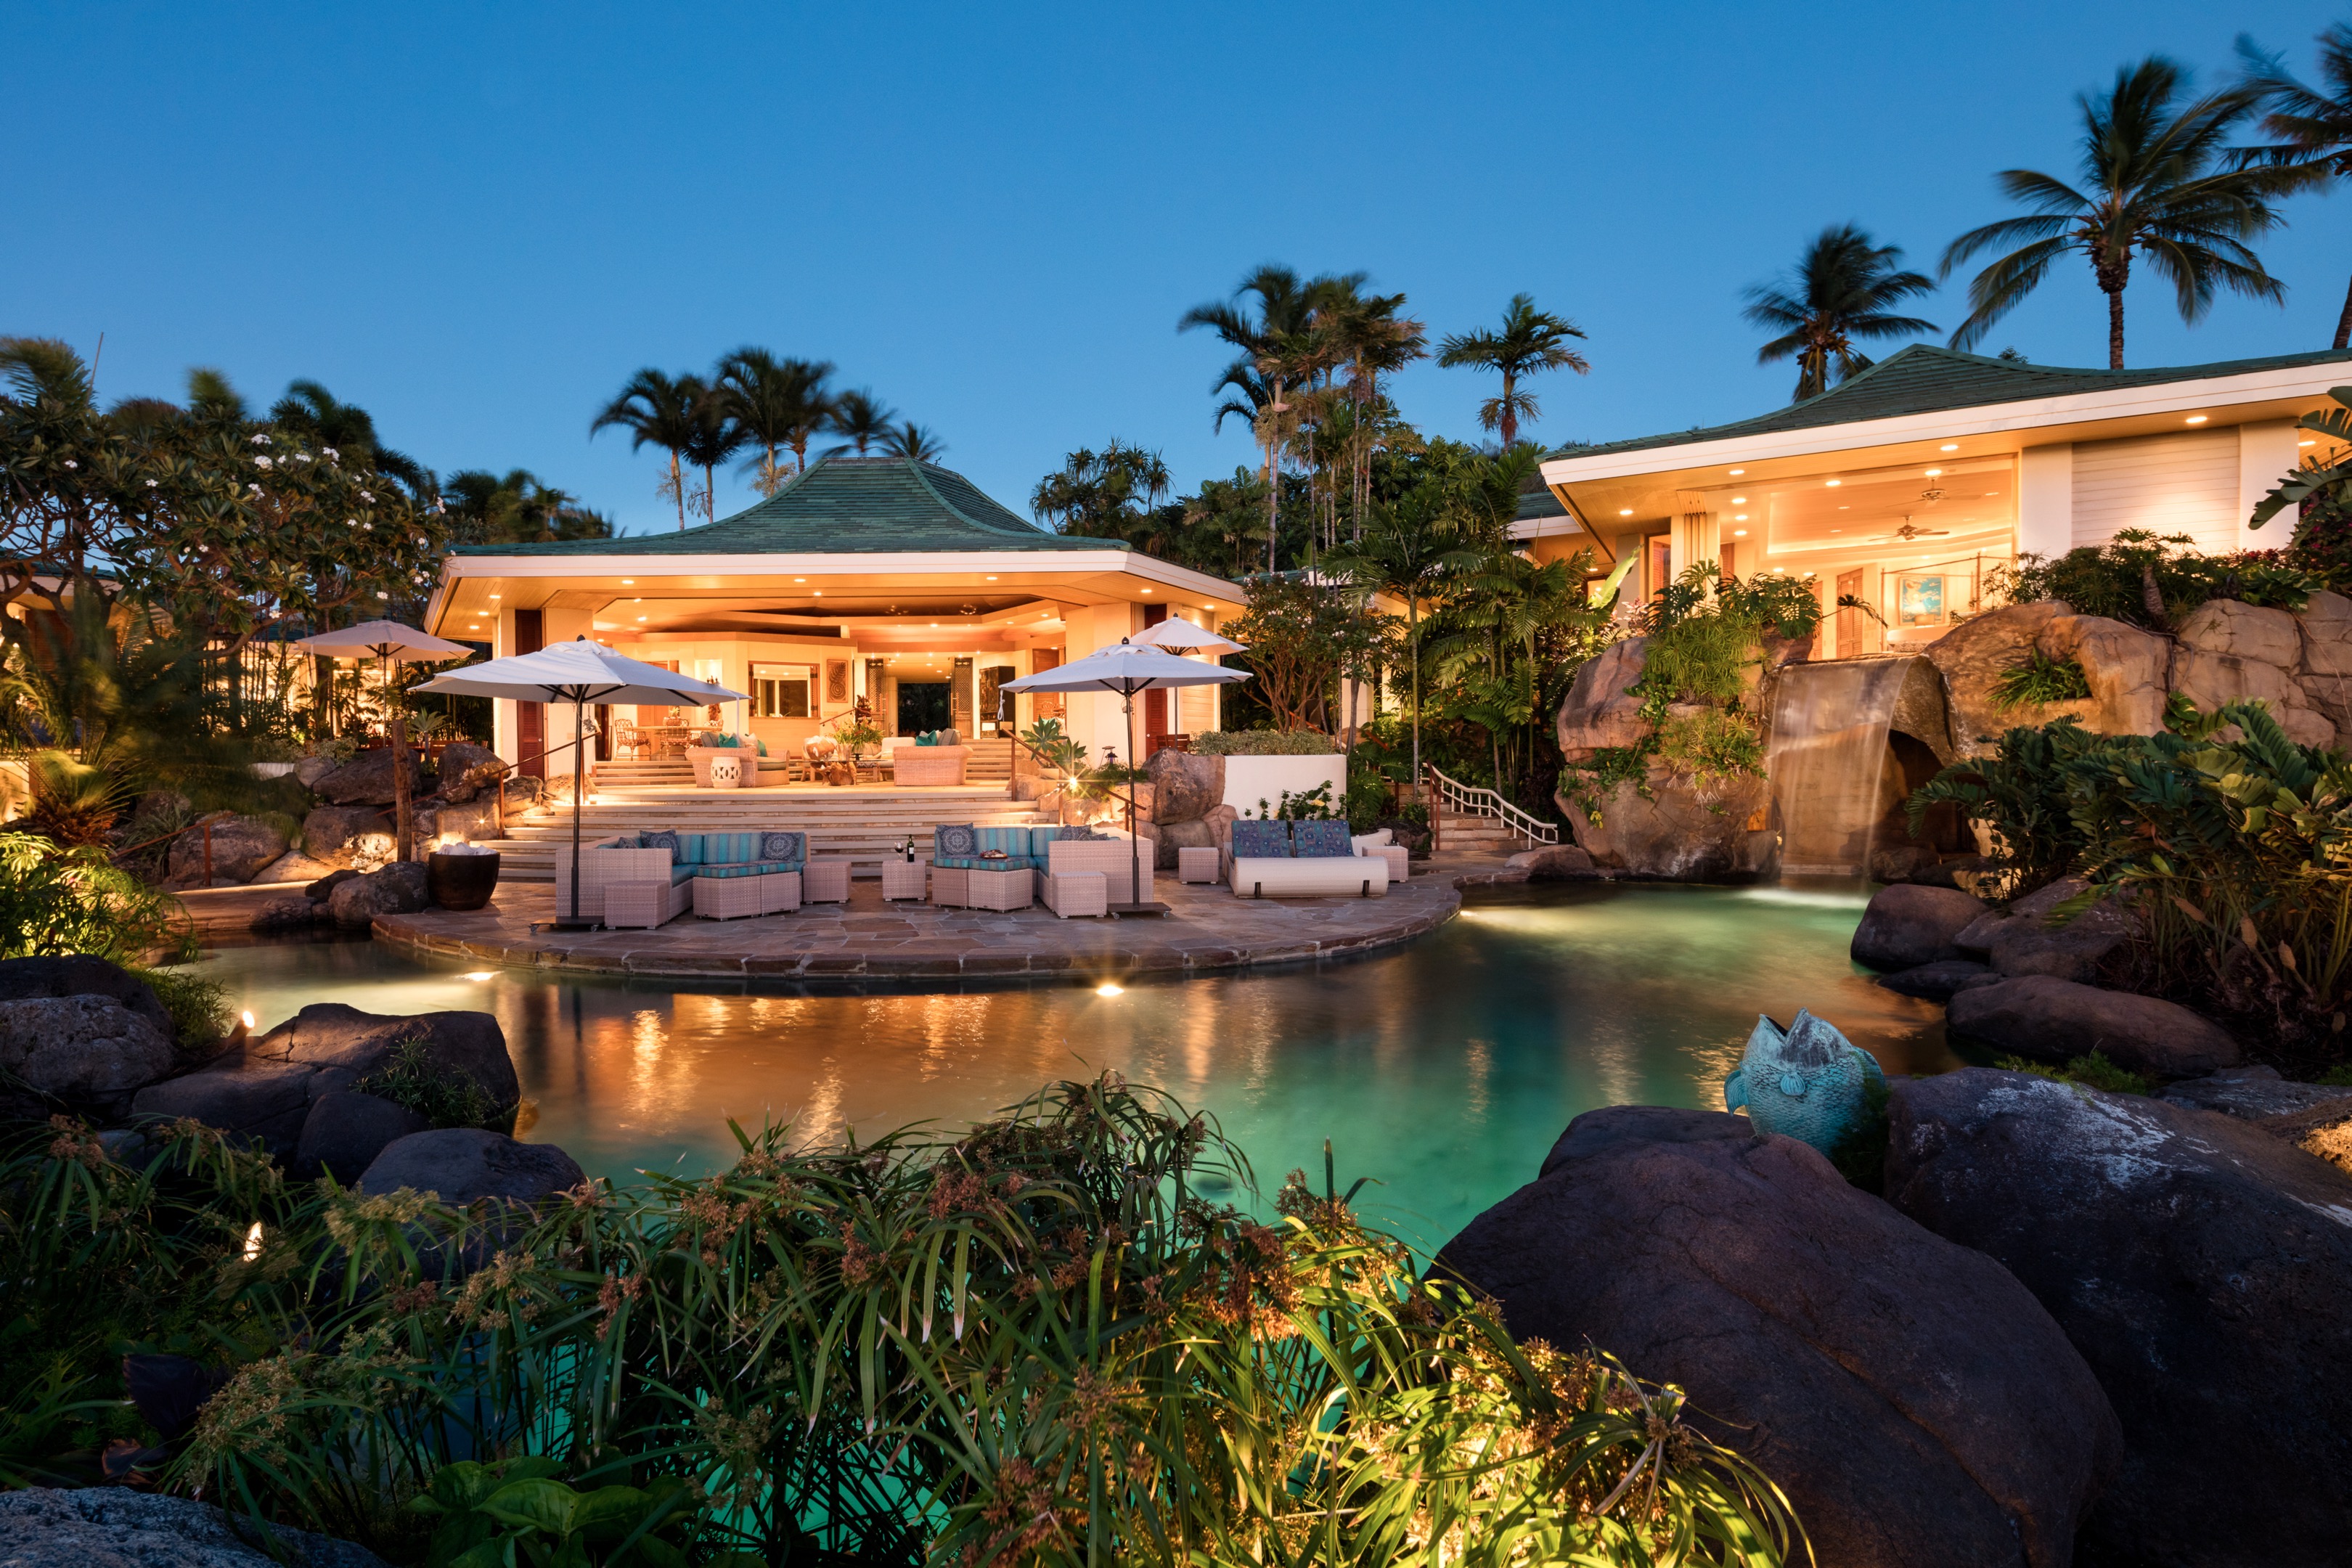 Twilight view of estate home with pool, pool deck, lanai, great room, and primary suite (on right).